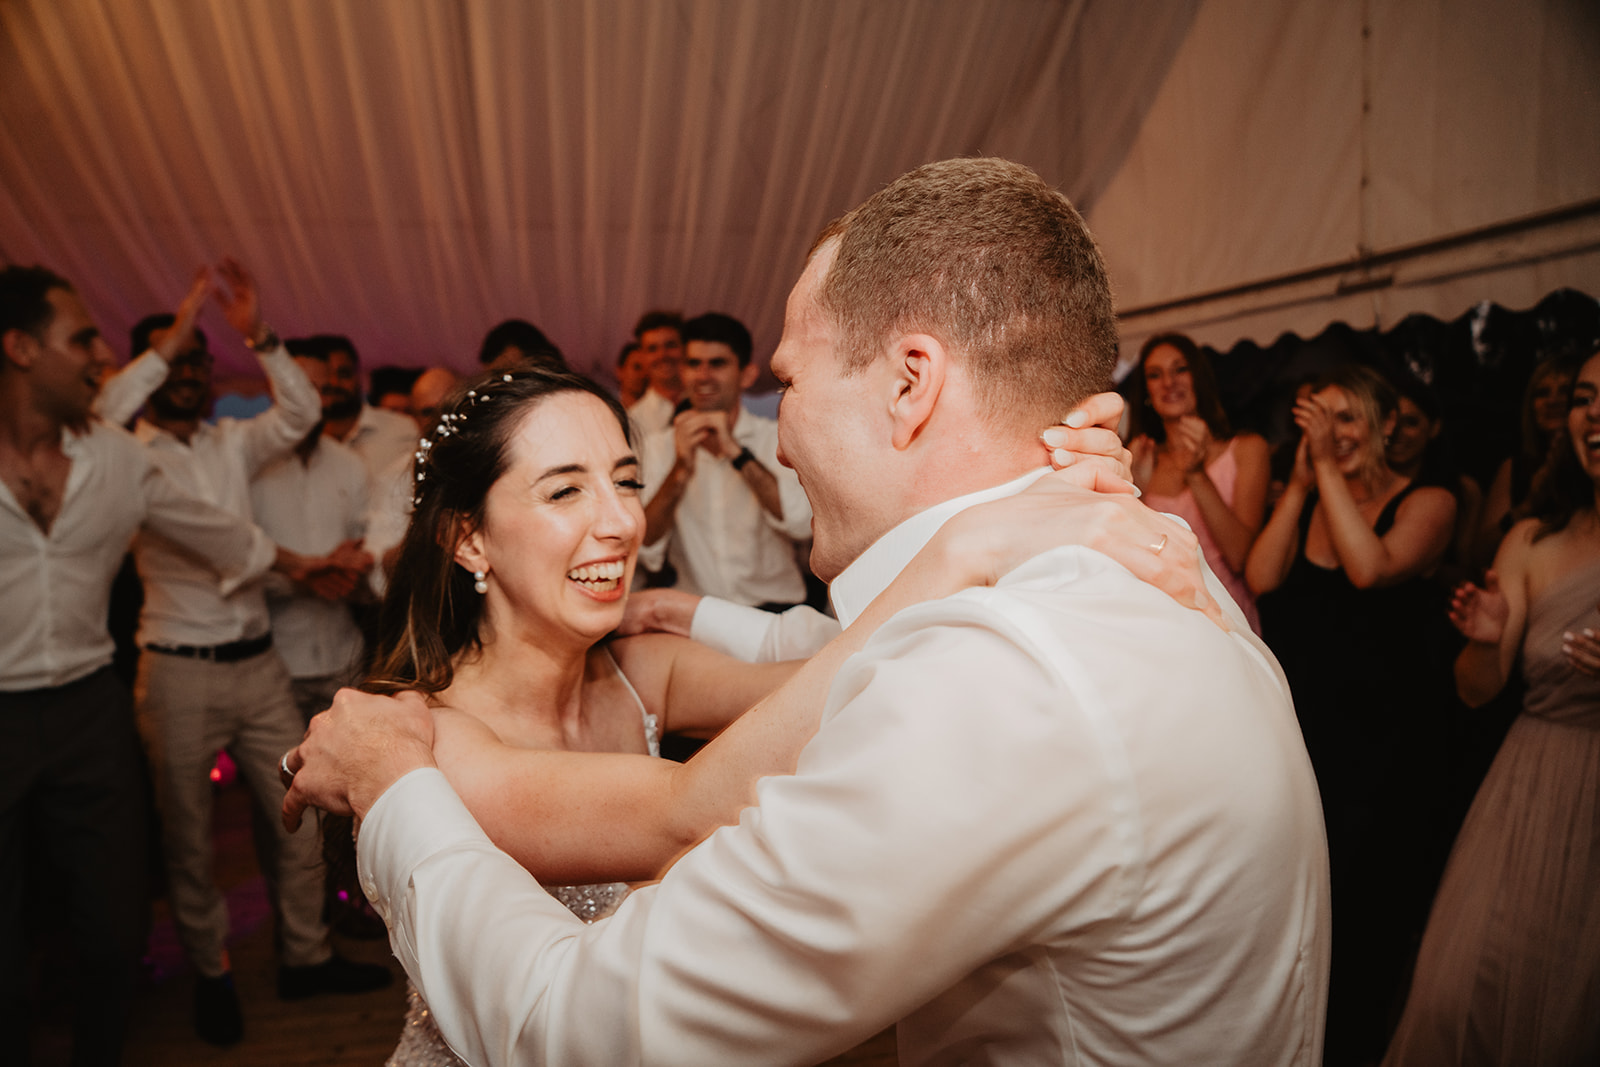 French wedding photos and video duo Bordeaux dancing party fun